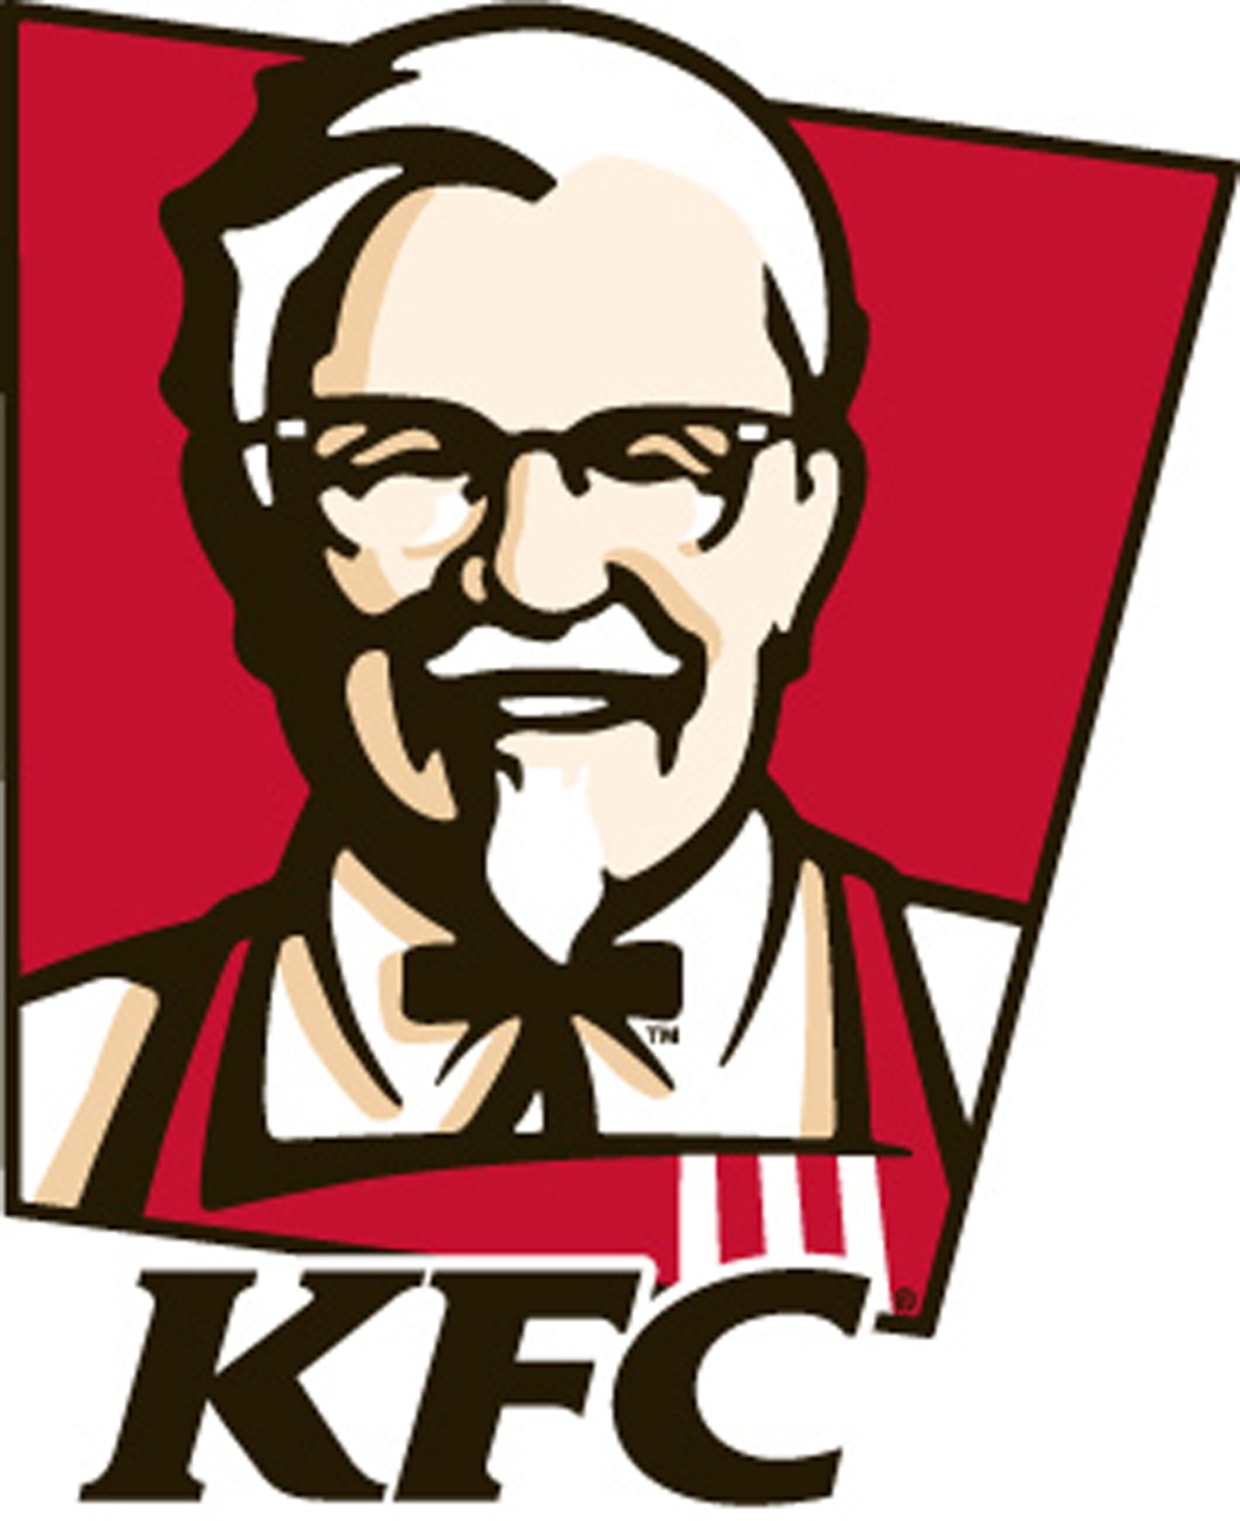 New KFC logo: It\'s all about The Colonel